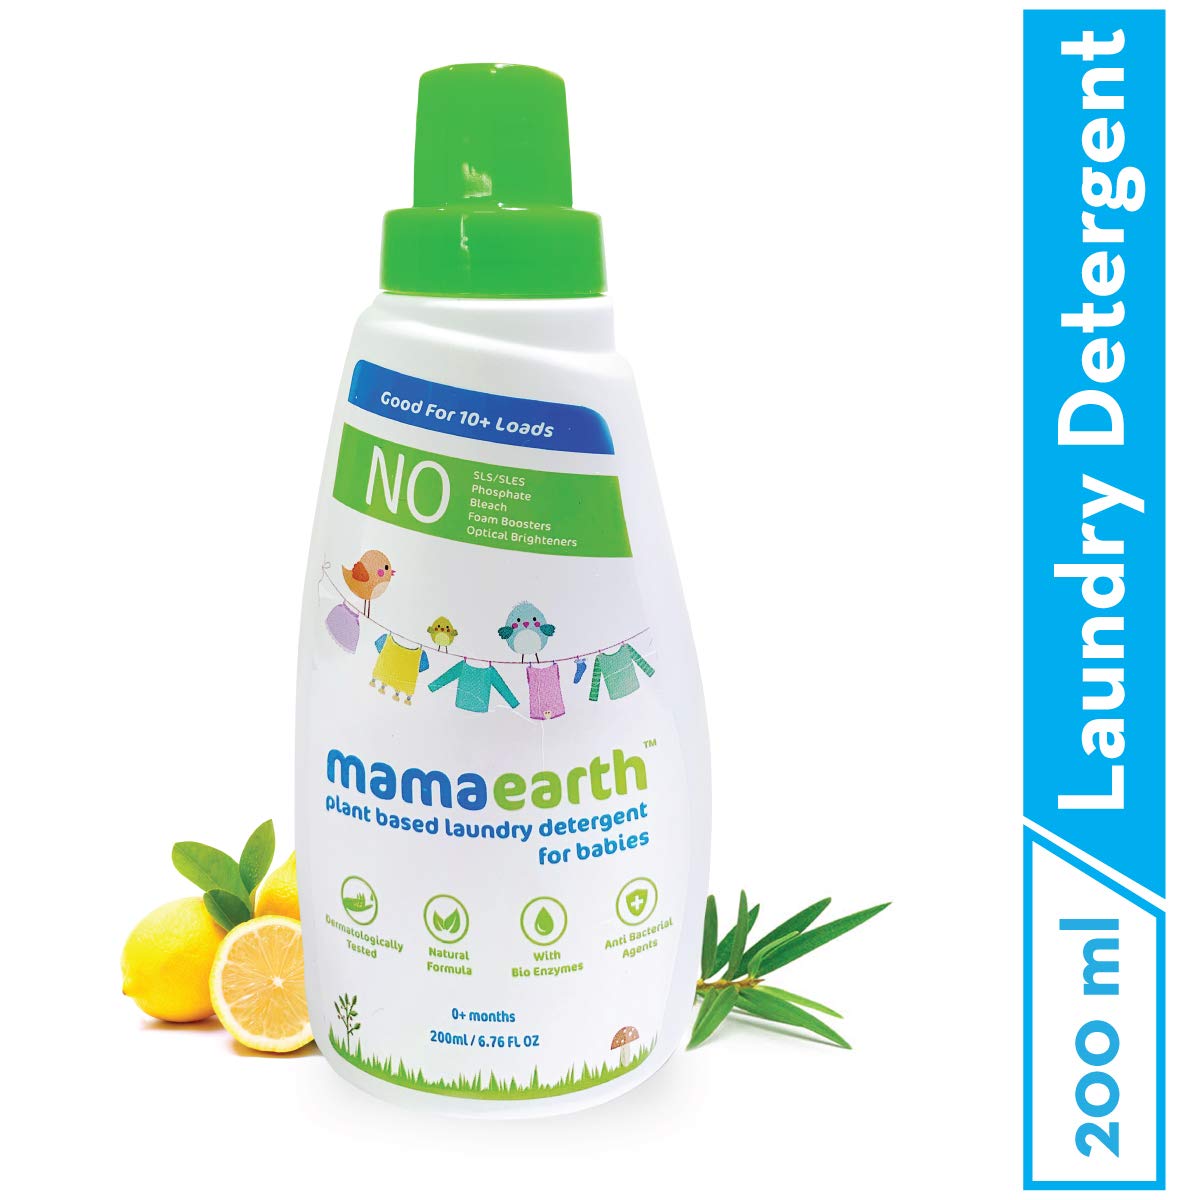 Mamaearth's Plant Based Baby Laundry Liquid Detergent, with Bio-Enzymes and Neem Extracts, 200ml